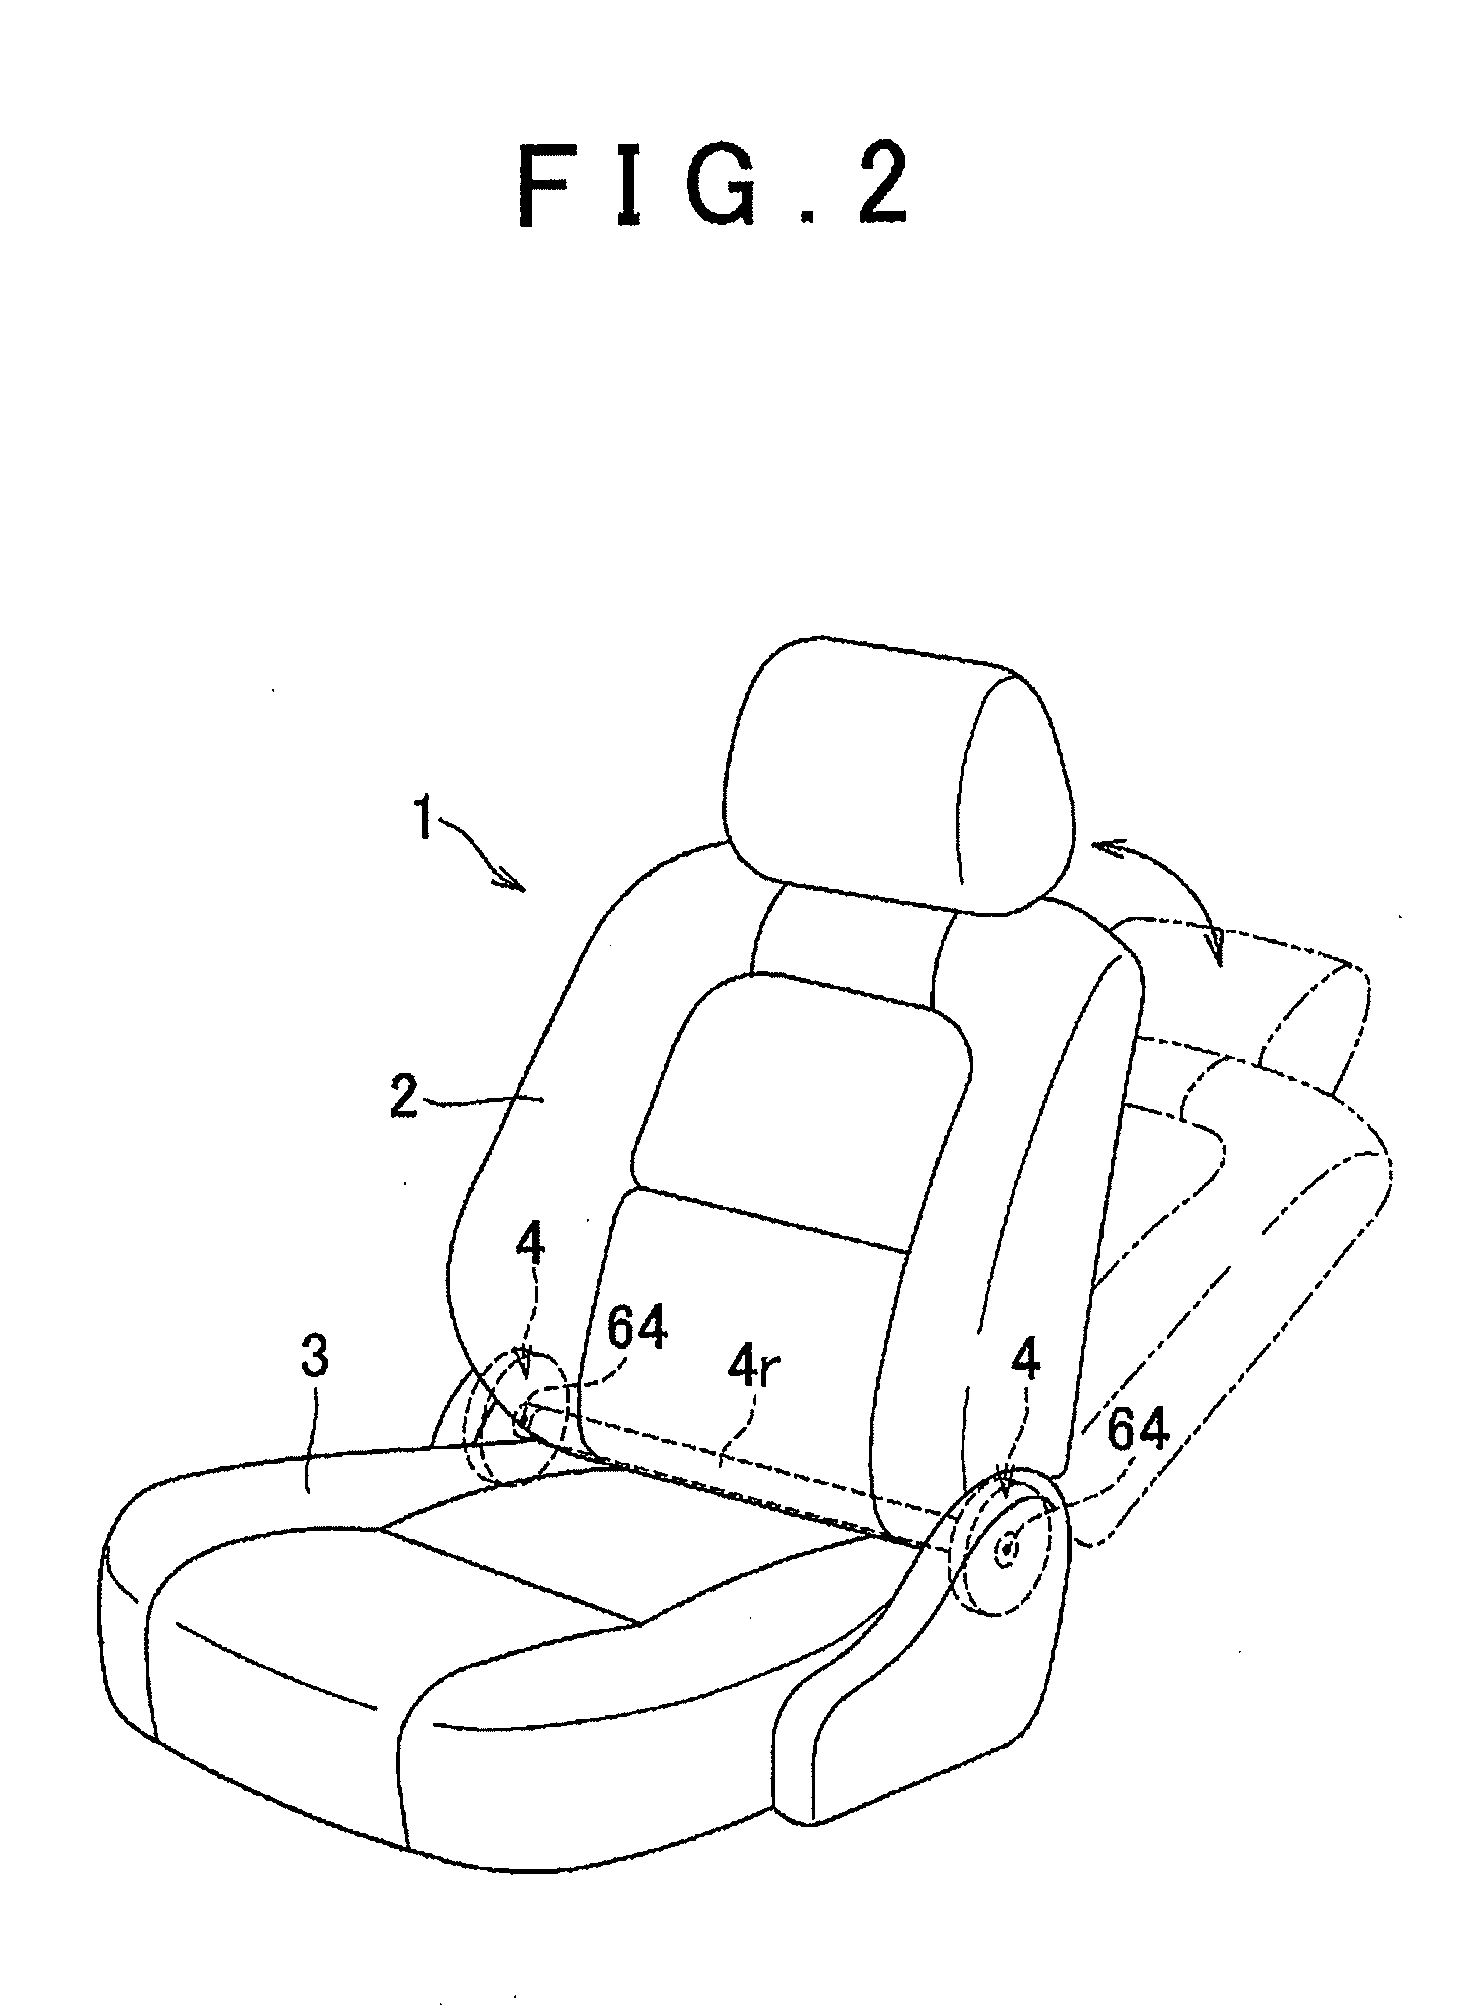 Connecting apparatus of a vehicle seat